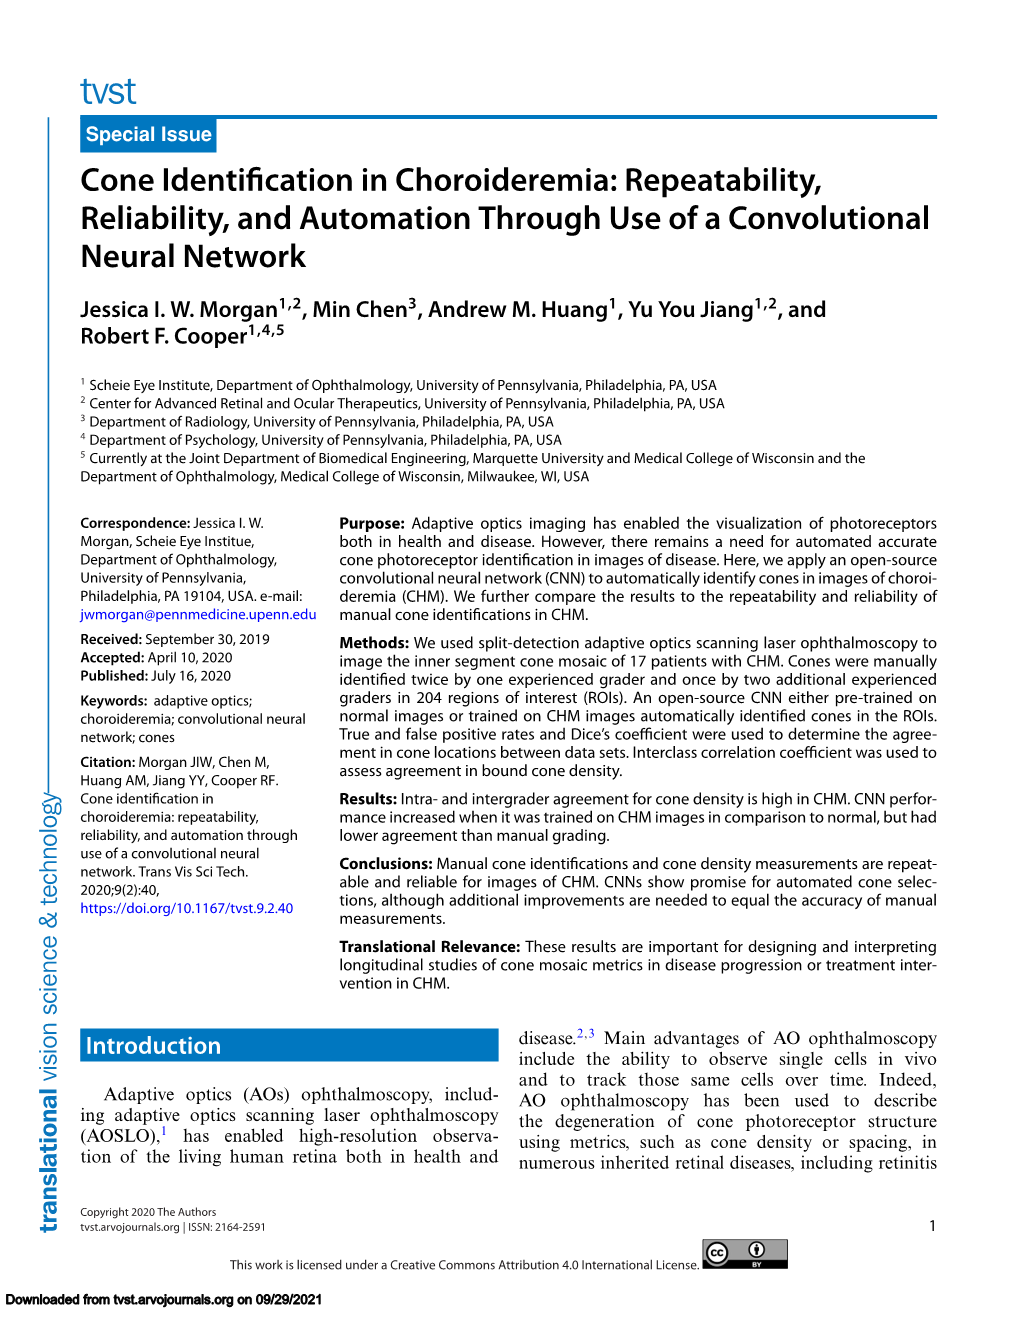 Cone Identification in Choroideremia: Repeatability, Reliability, and Automation Through Use of a Convolutional Neural Network